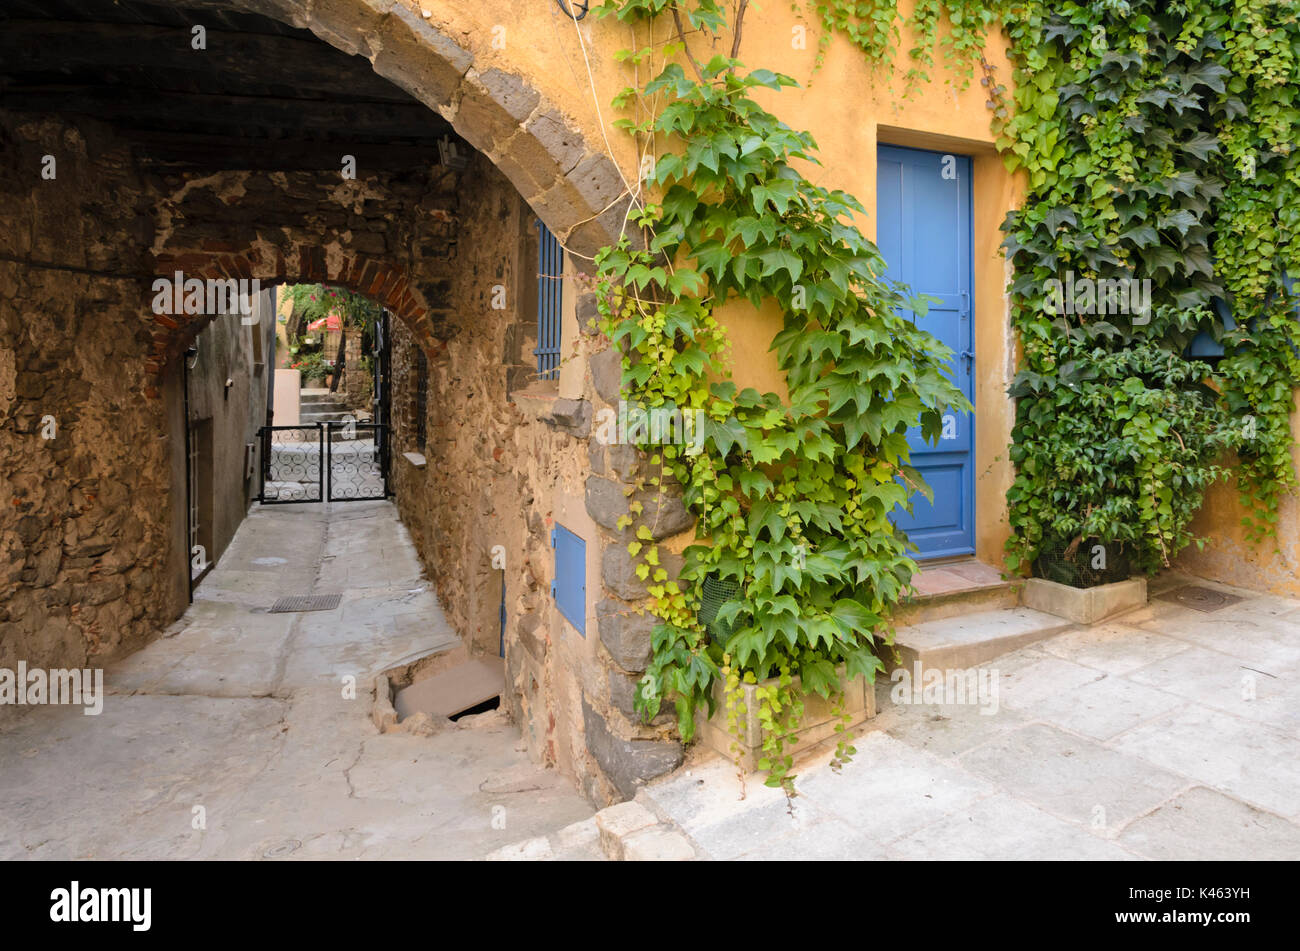 Japanese creeper (Parthenocissus tricuspidata) at an old town house, Grimaud, France Stock Photo